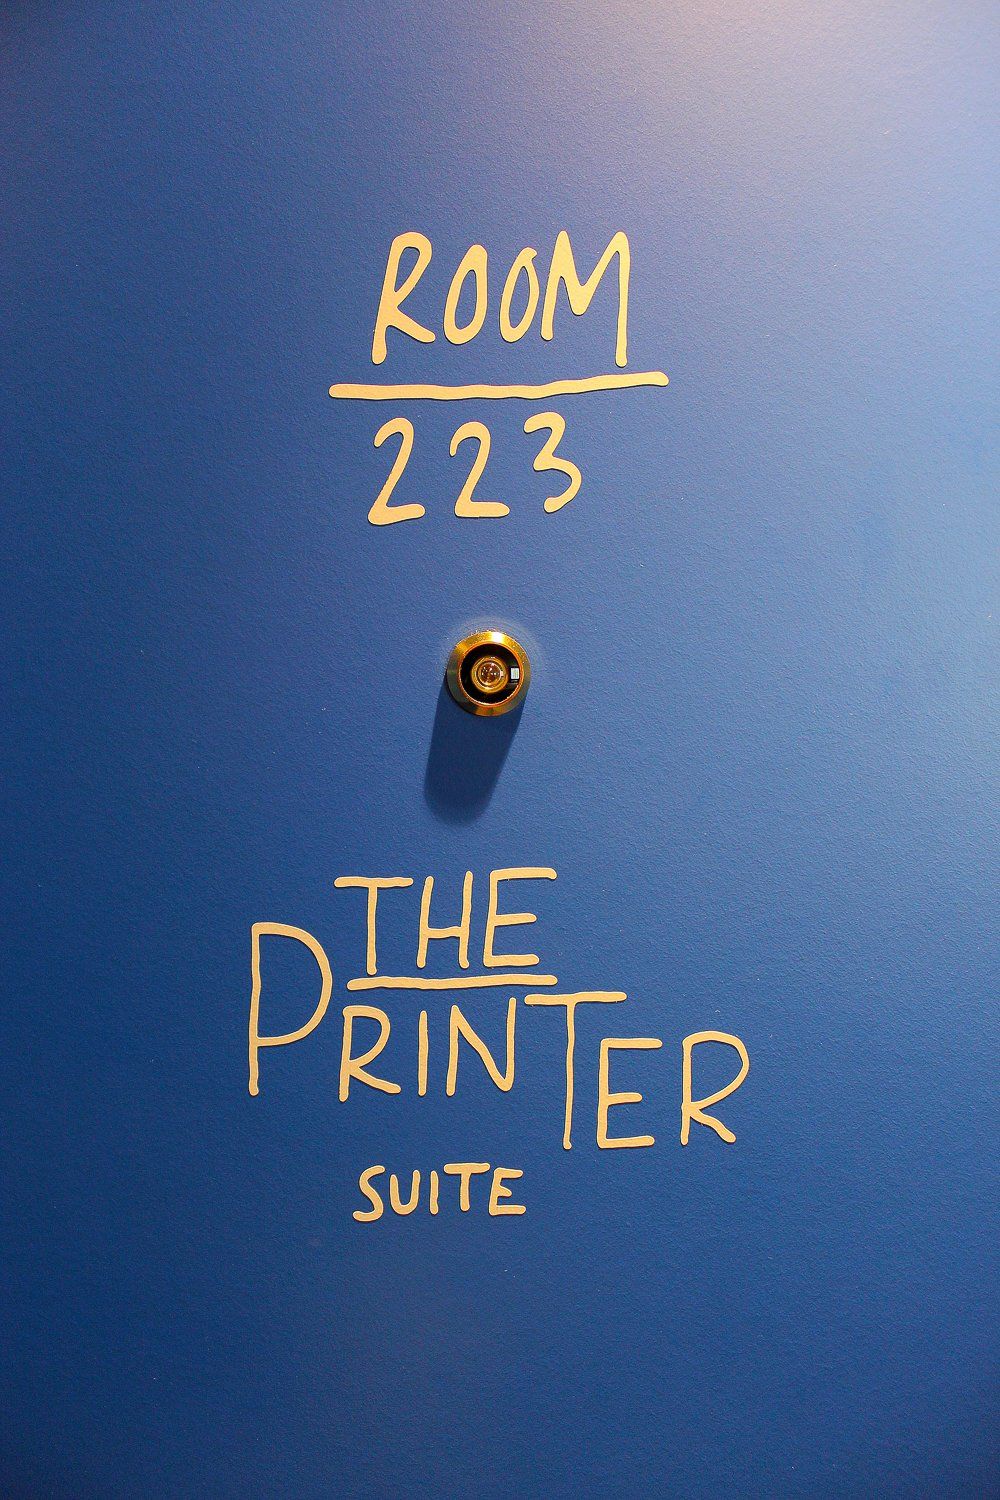 Entrance to The Printer Suite at the Ink Hotel Amsterdam